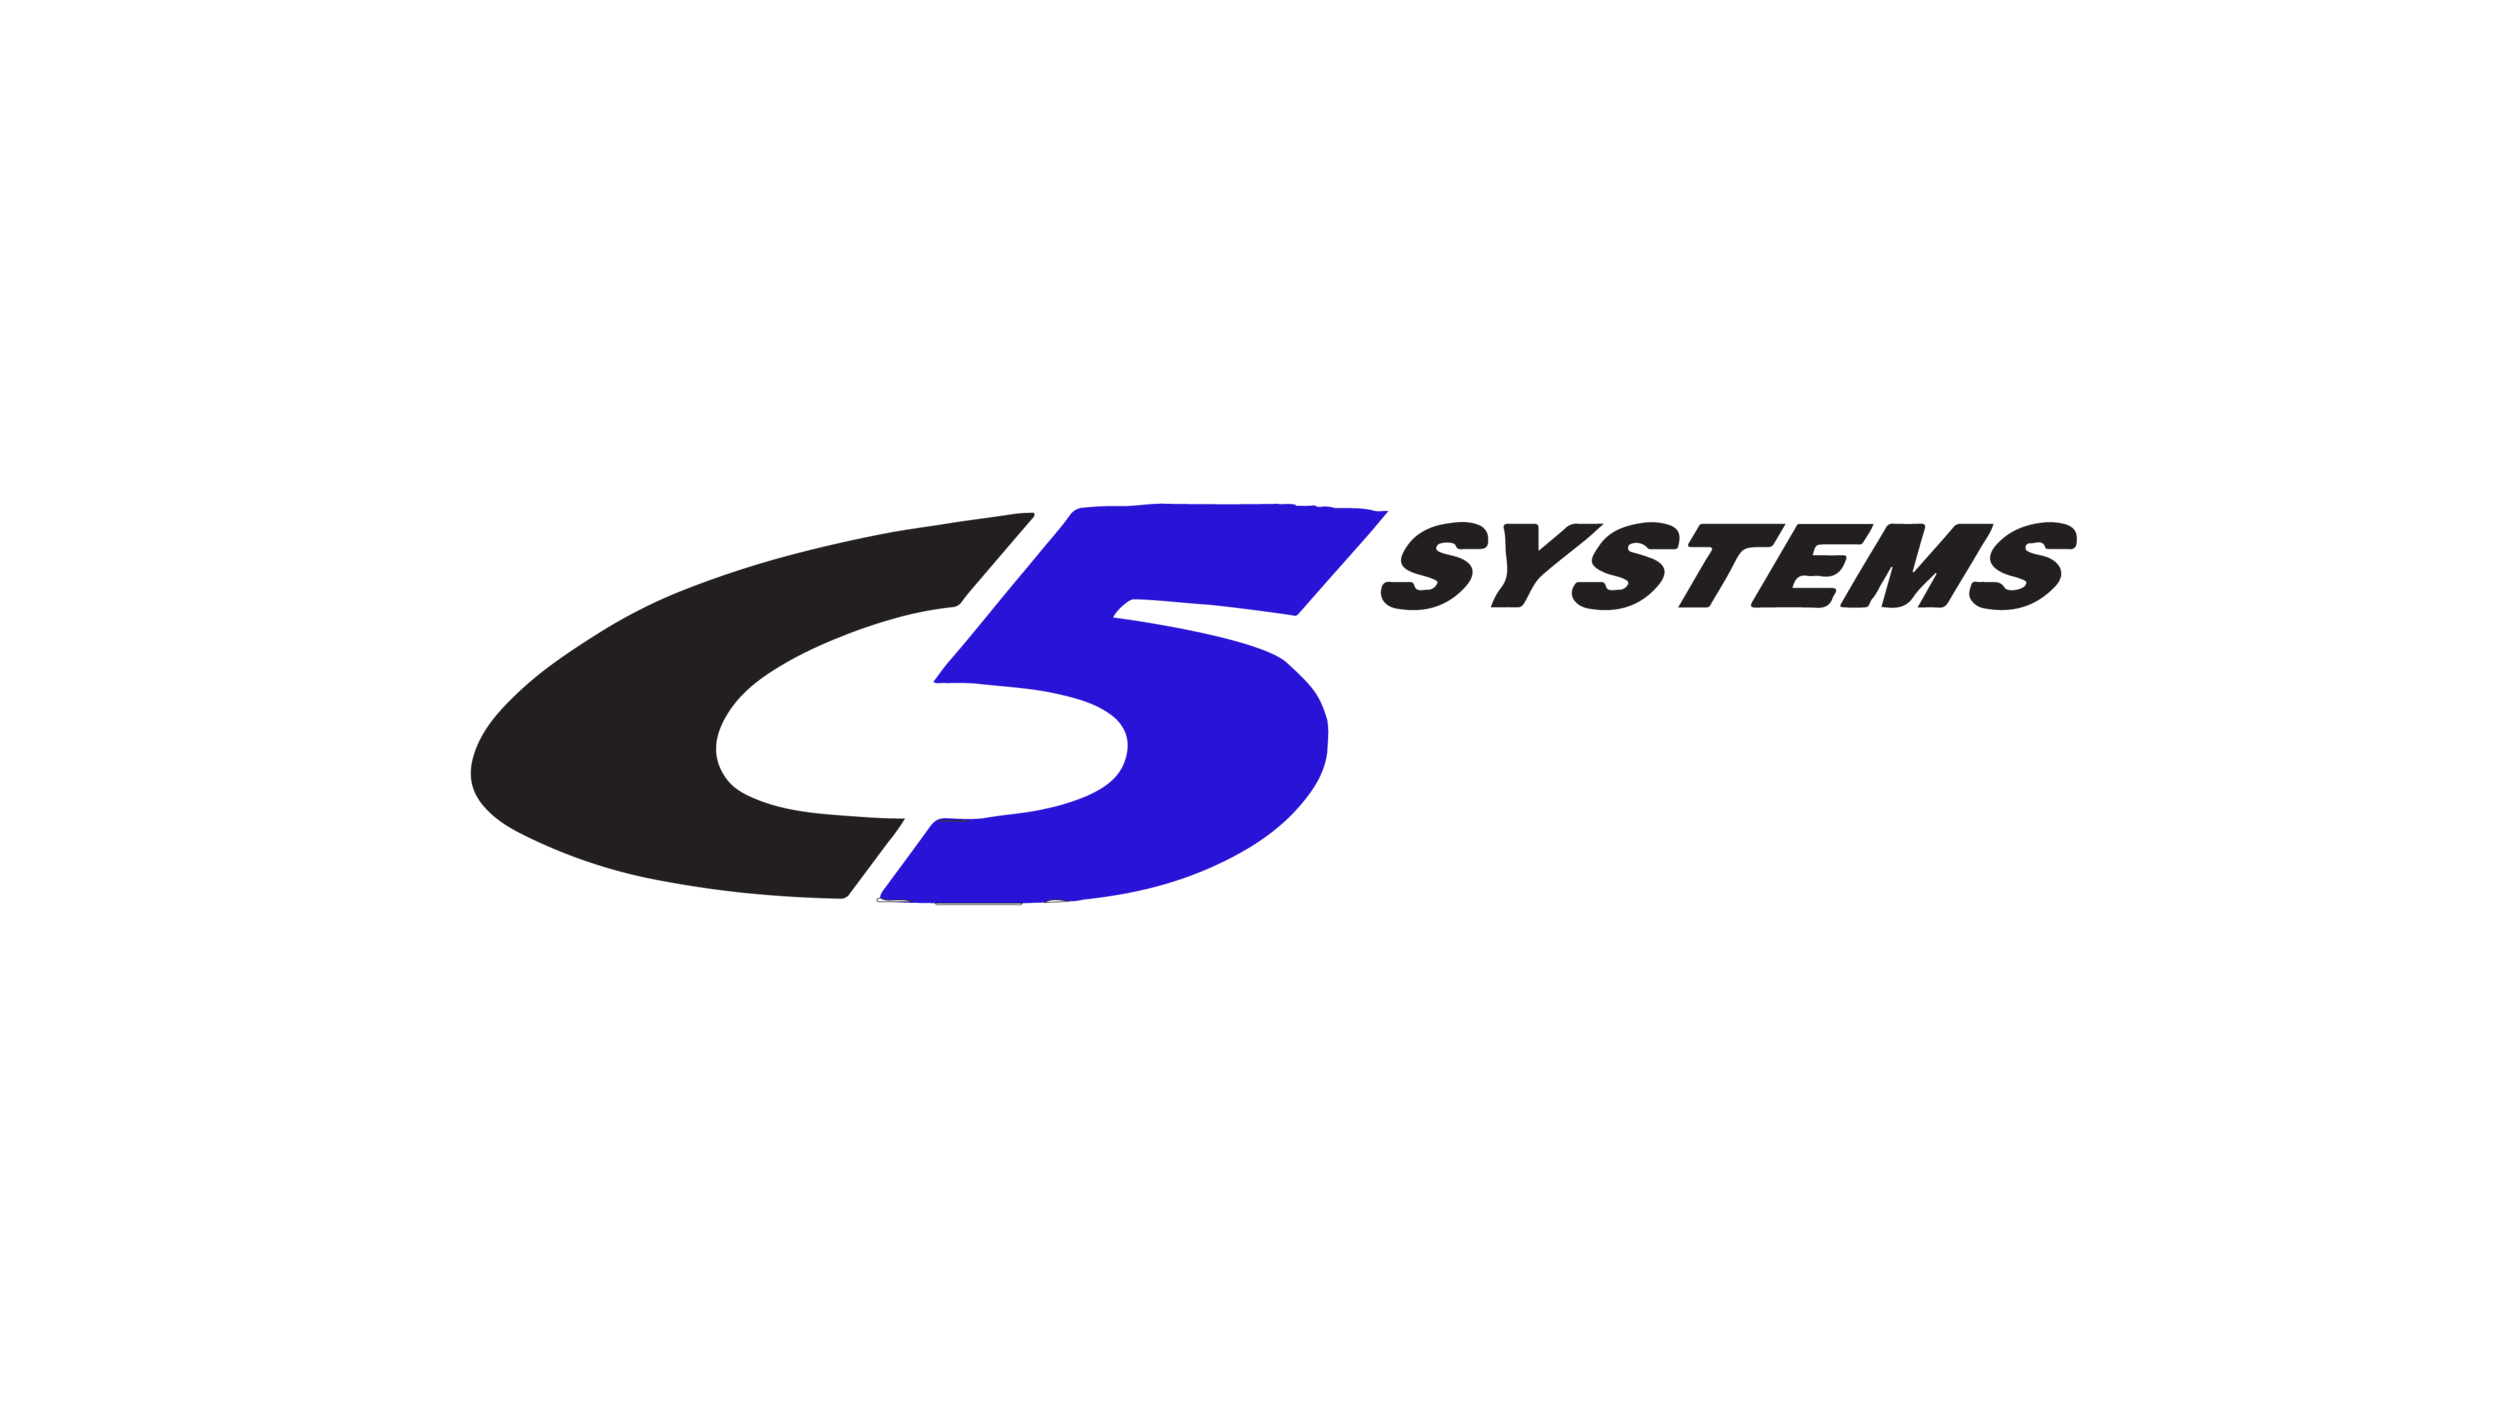 C5 Systems.png